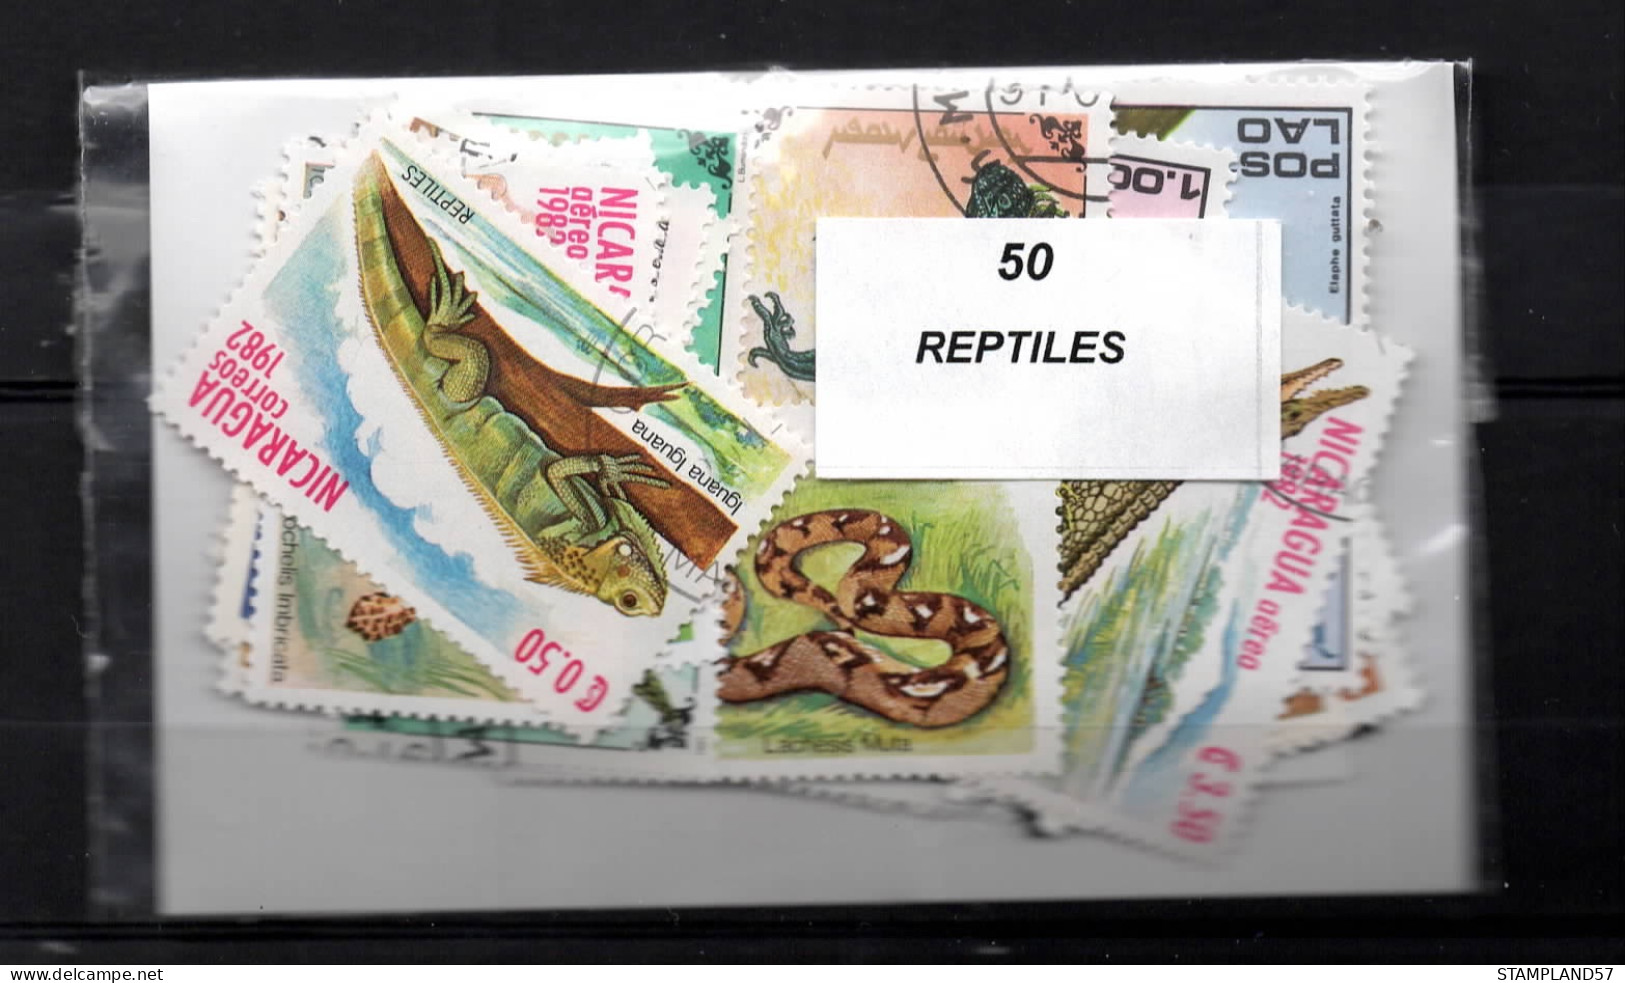 Reptiles - 50 Timbres Différents - Tous Pays - Serpenti